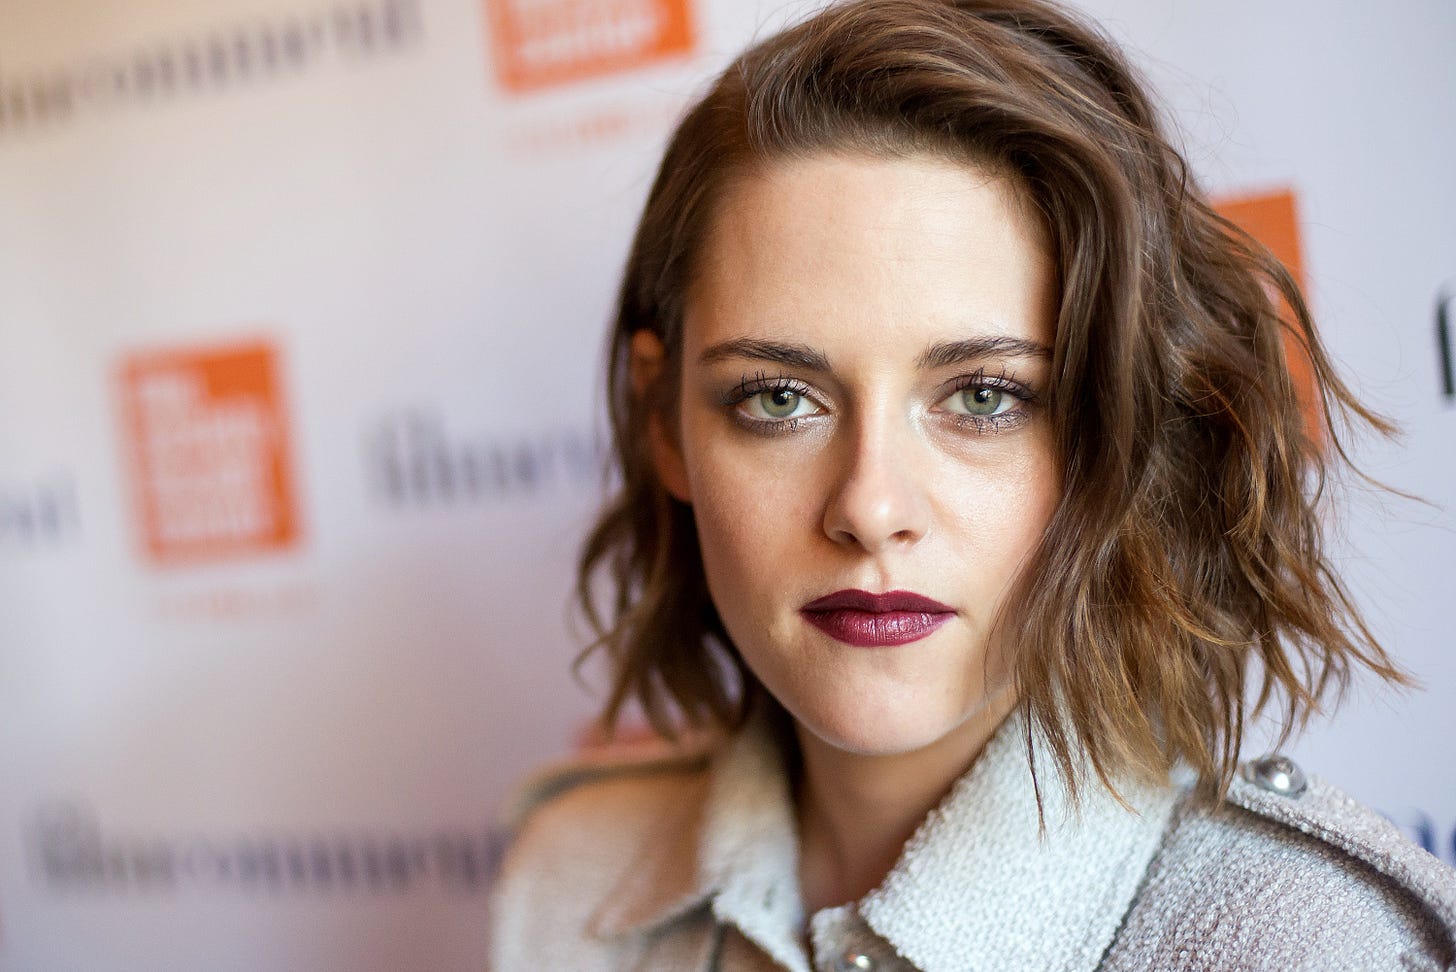 Kristen Stewart Just Authored a Paper on Artificial Intelligence | Fortune